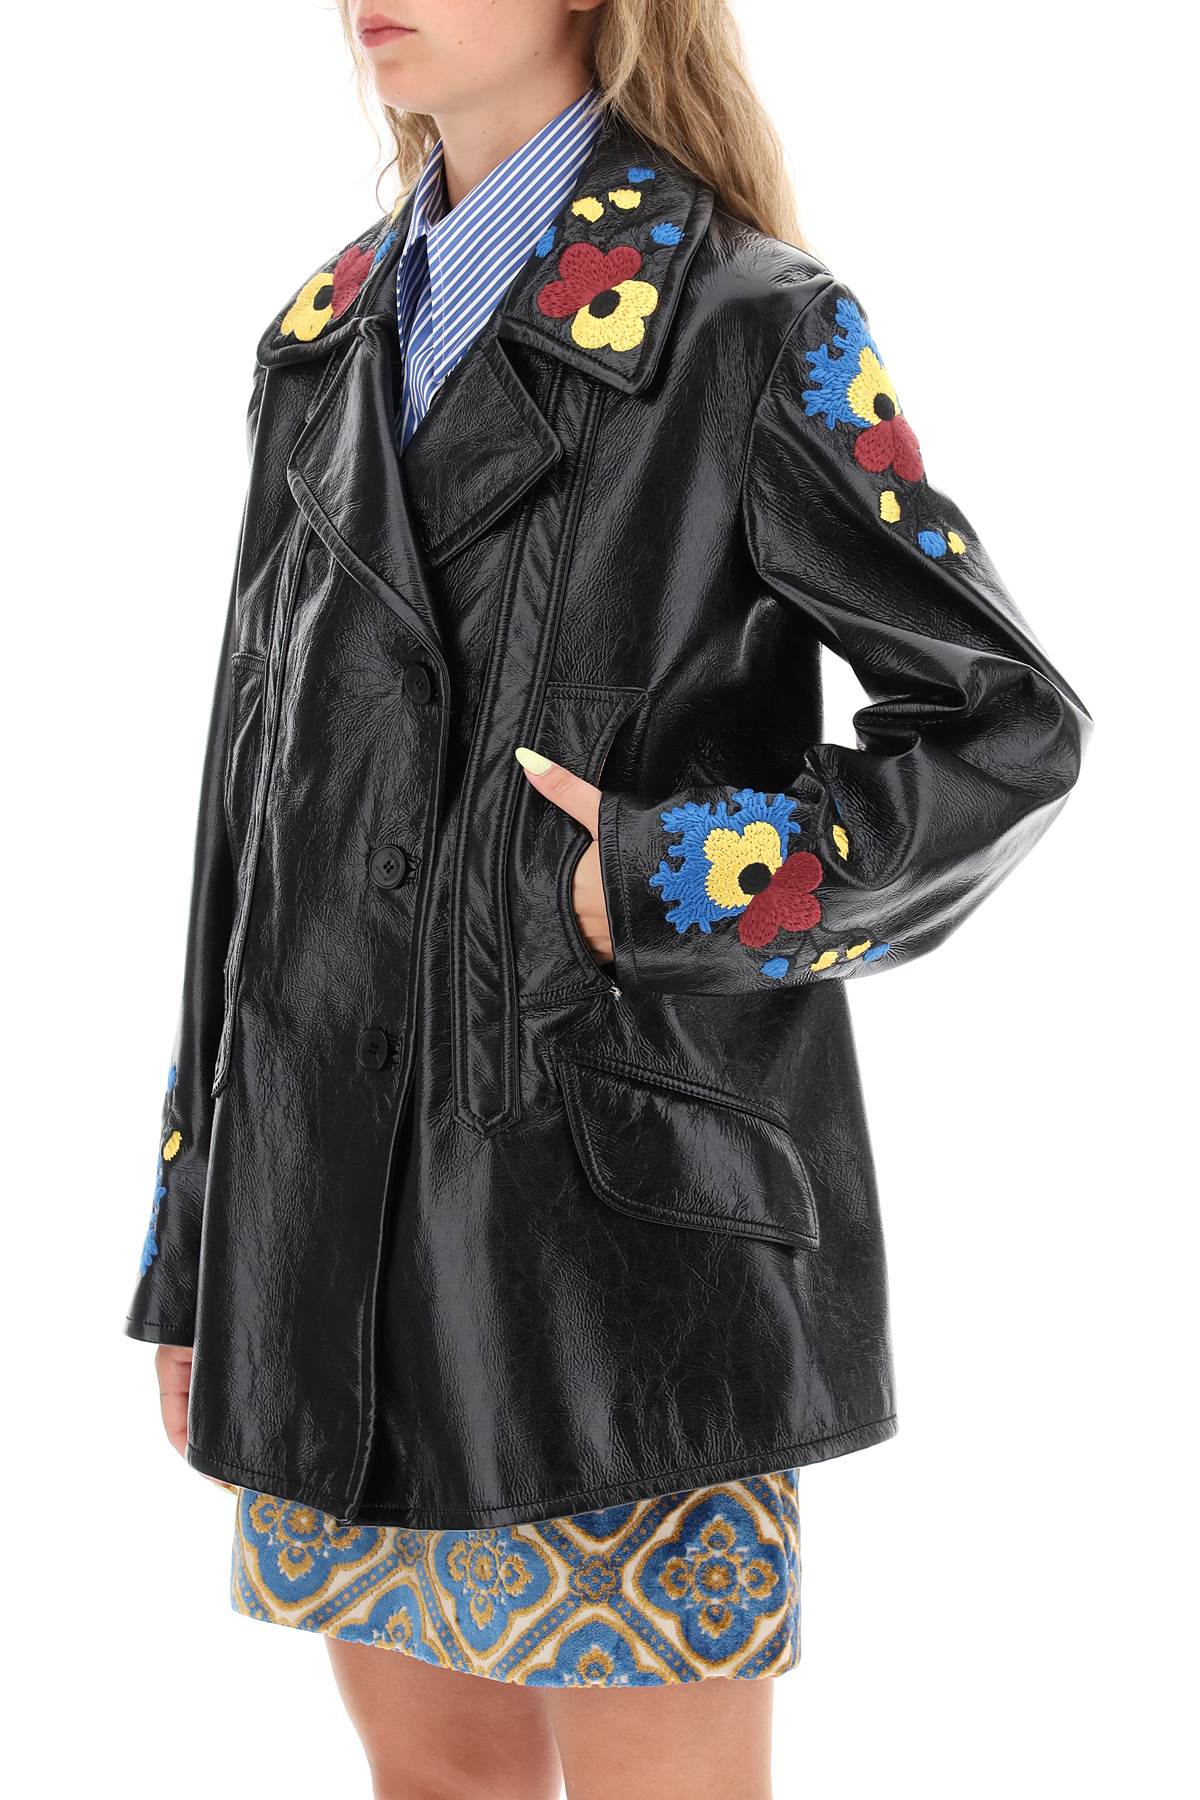 Etro jacket in patent faux leather with floral embroideries-3